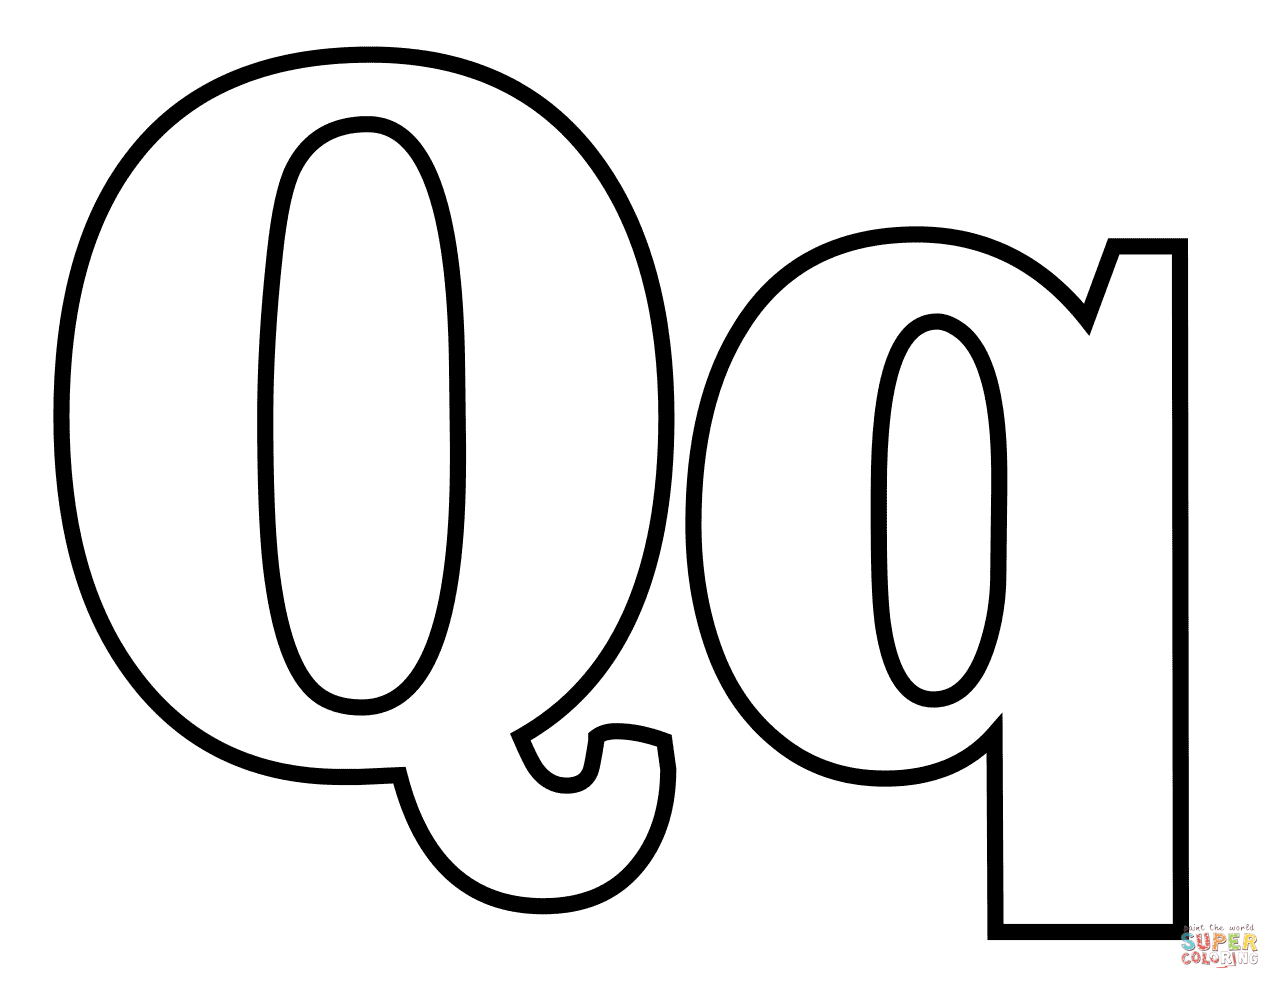 Letter Q coloring page | Free Printable Coloring Pages